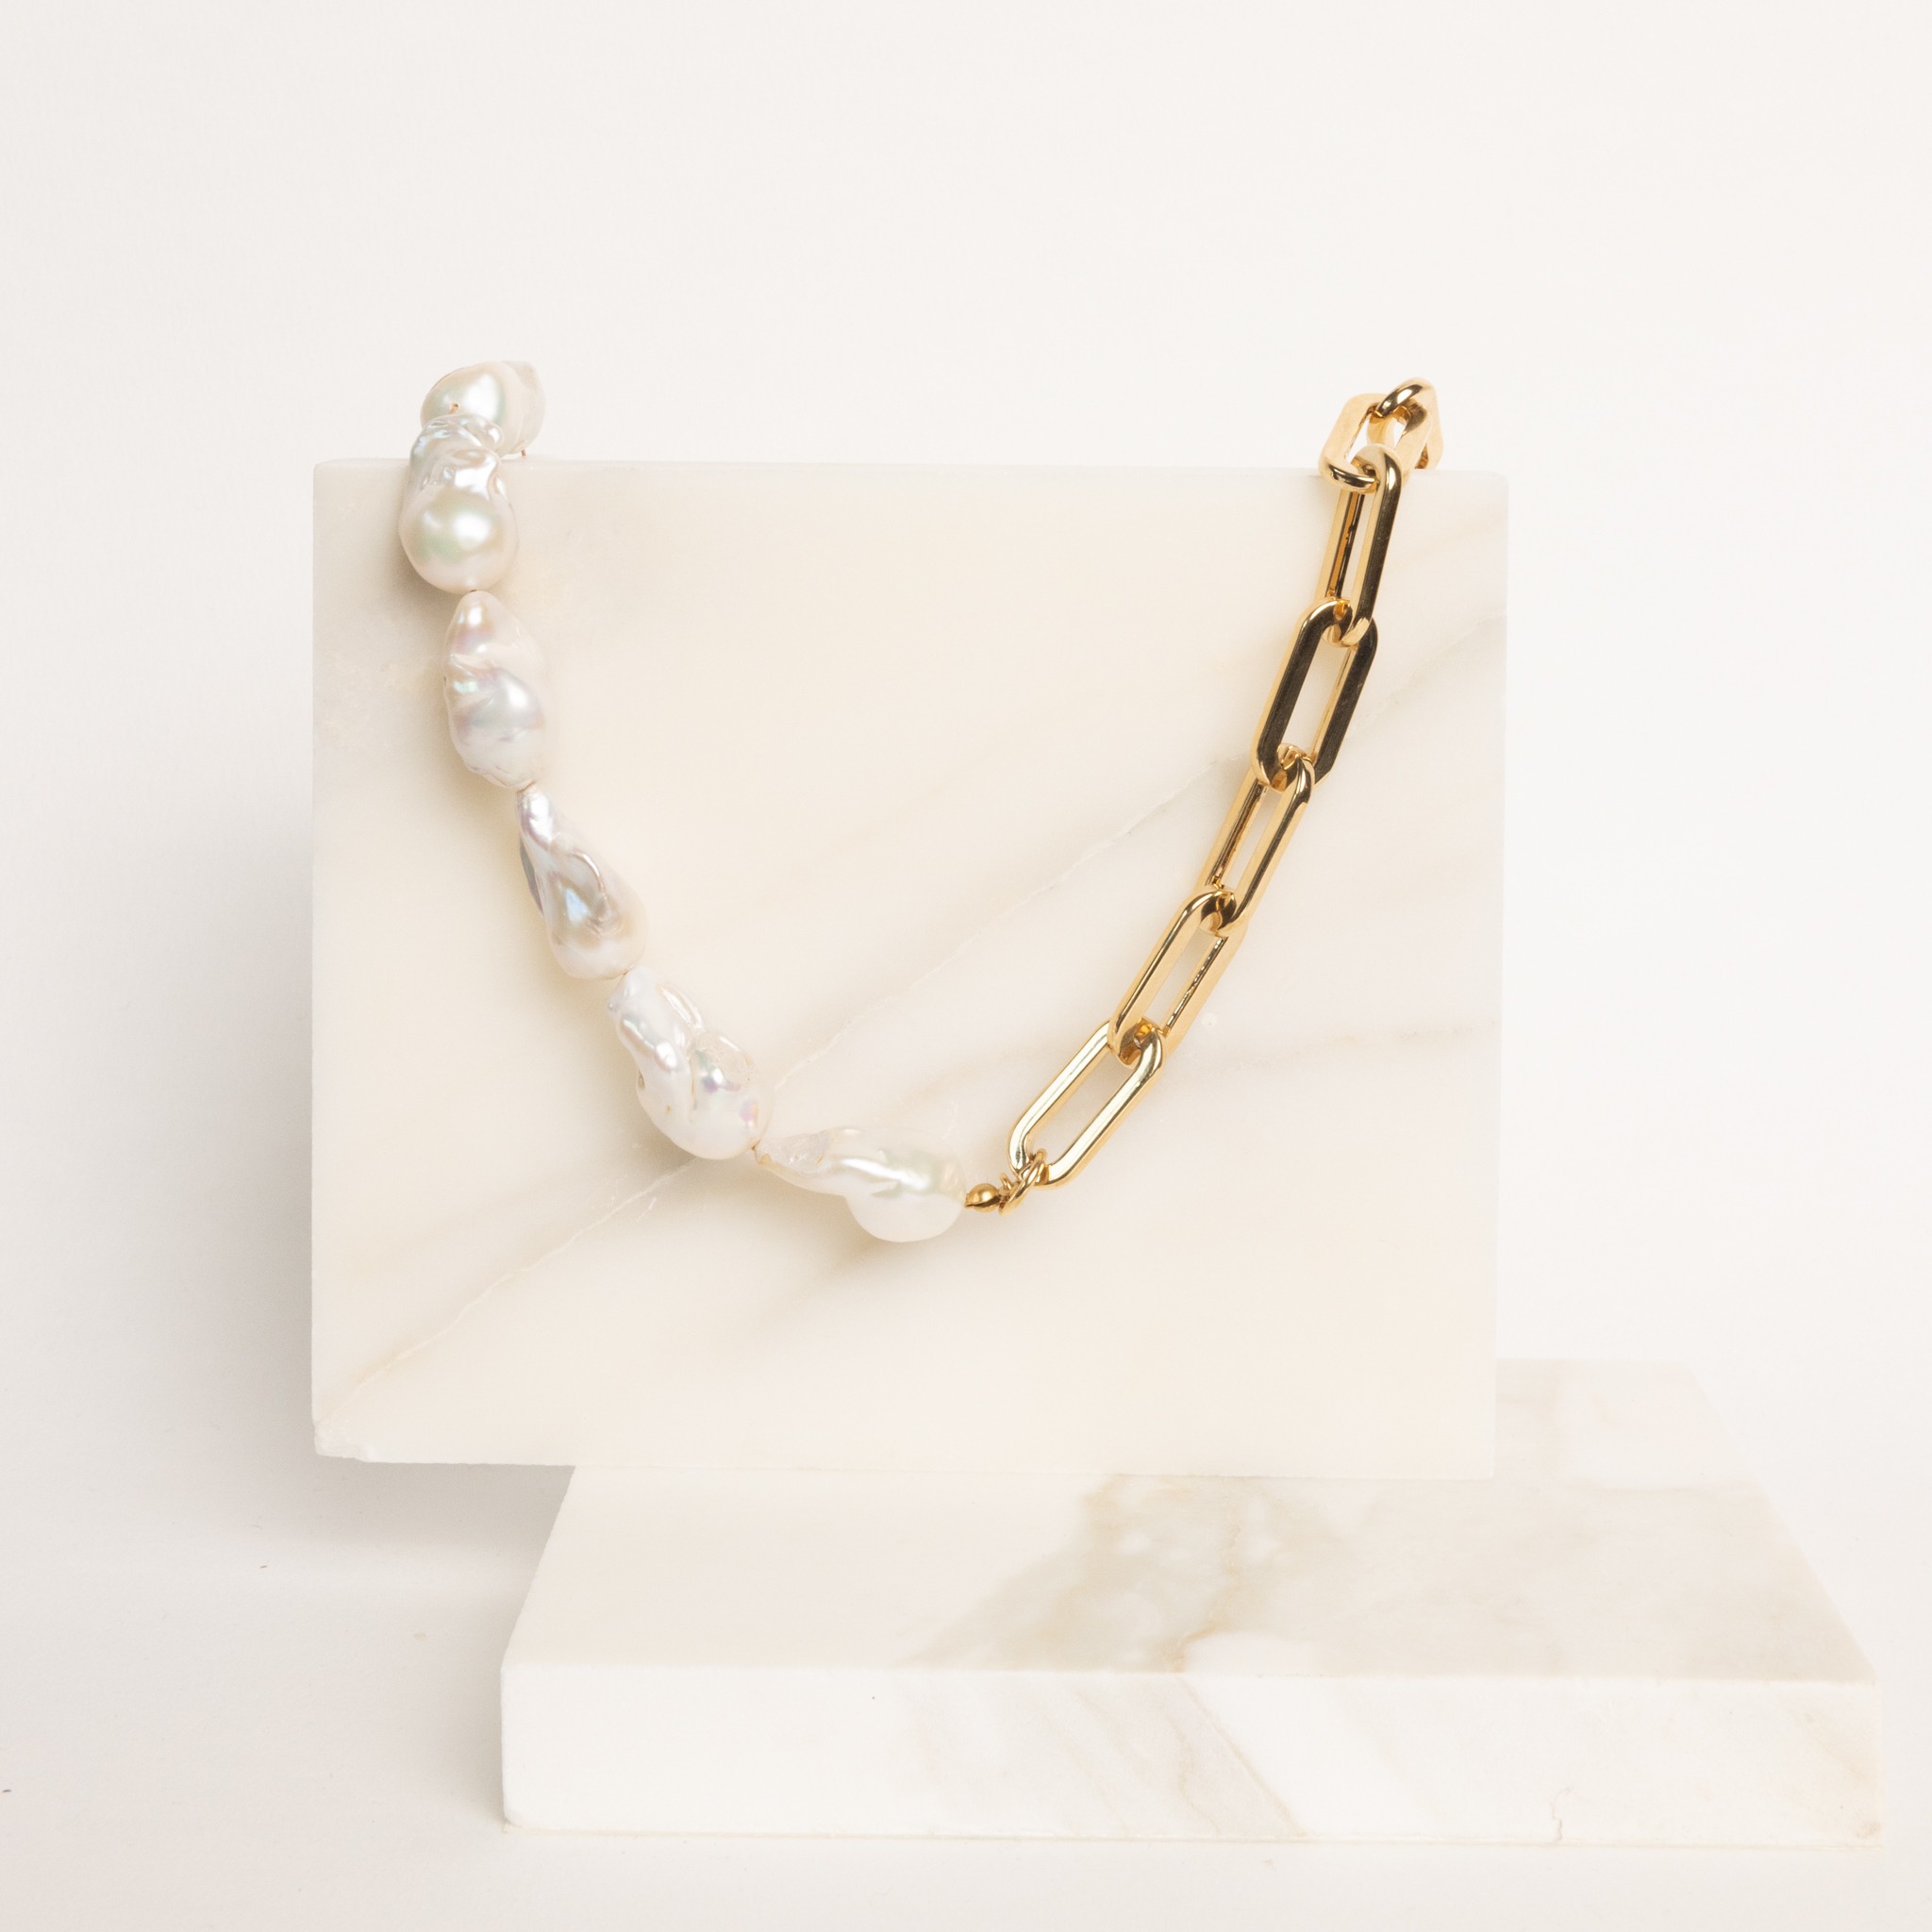 Cocco large wild pearl mix necklace